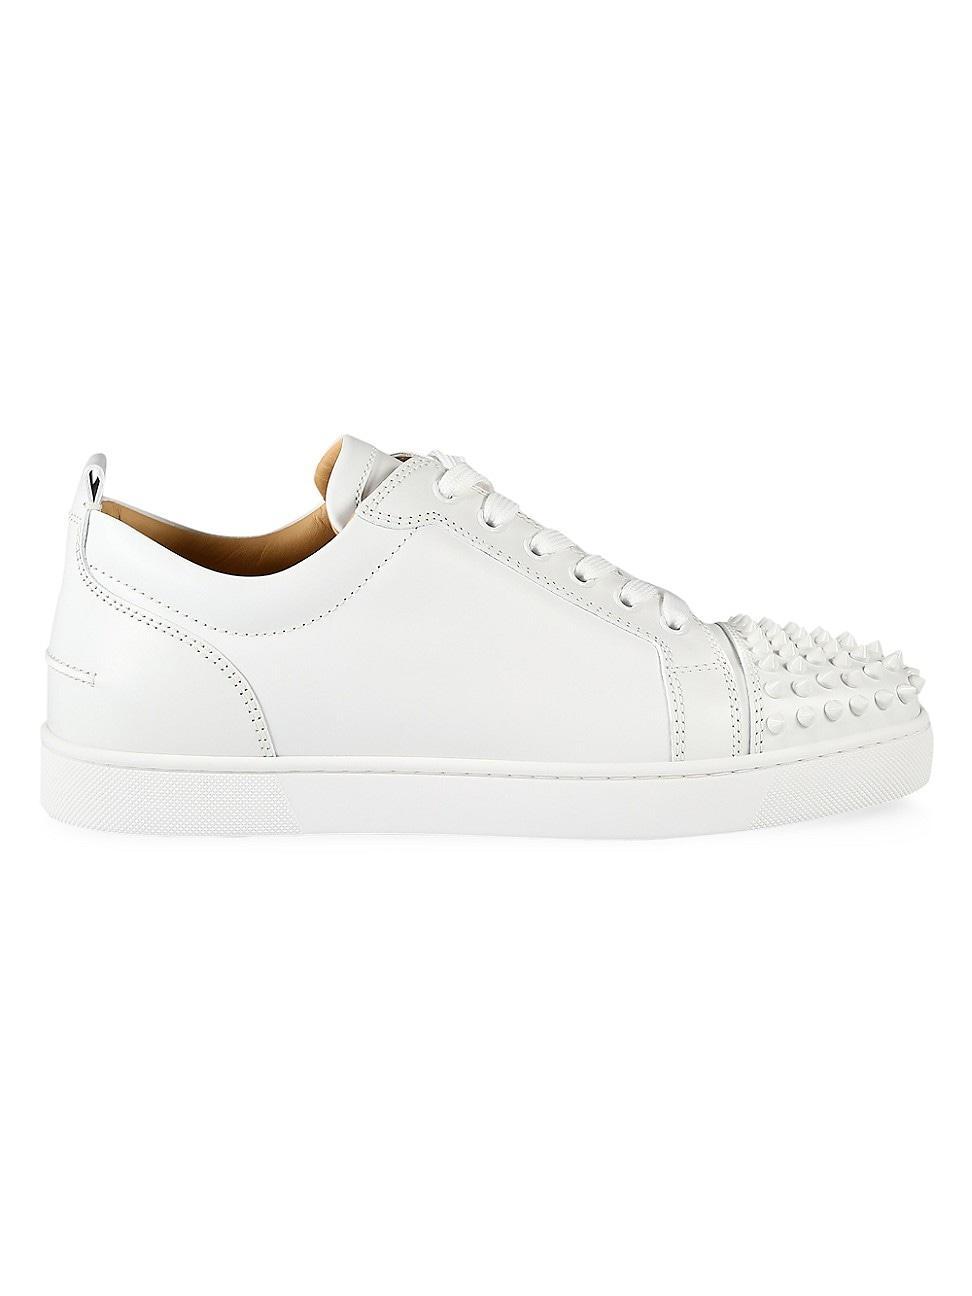 Christian Louboutin Louis Junior Spikes Sneaker Product Image